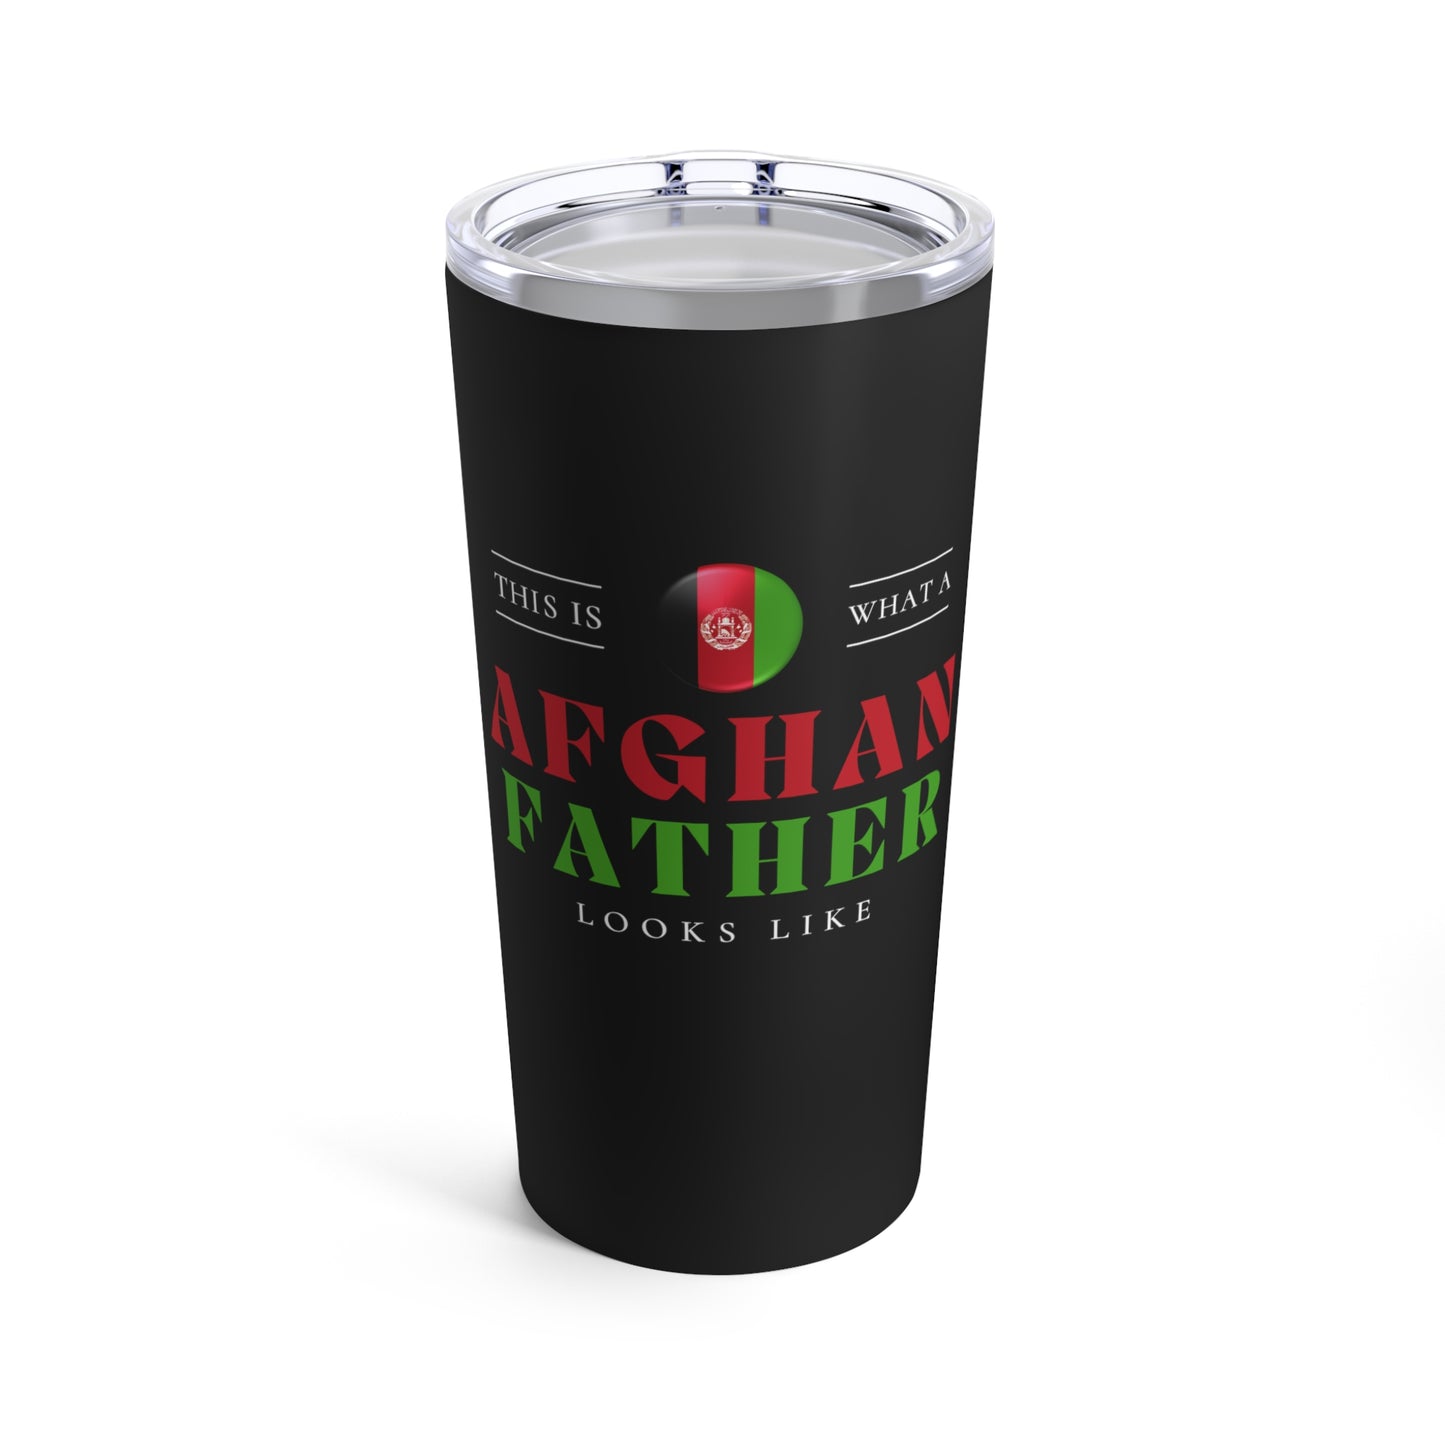 Afghan Father Looks Like Afghanistan Flag Fathers Day Tumbler 20oz Beverage Container